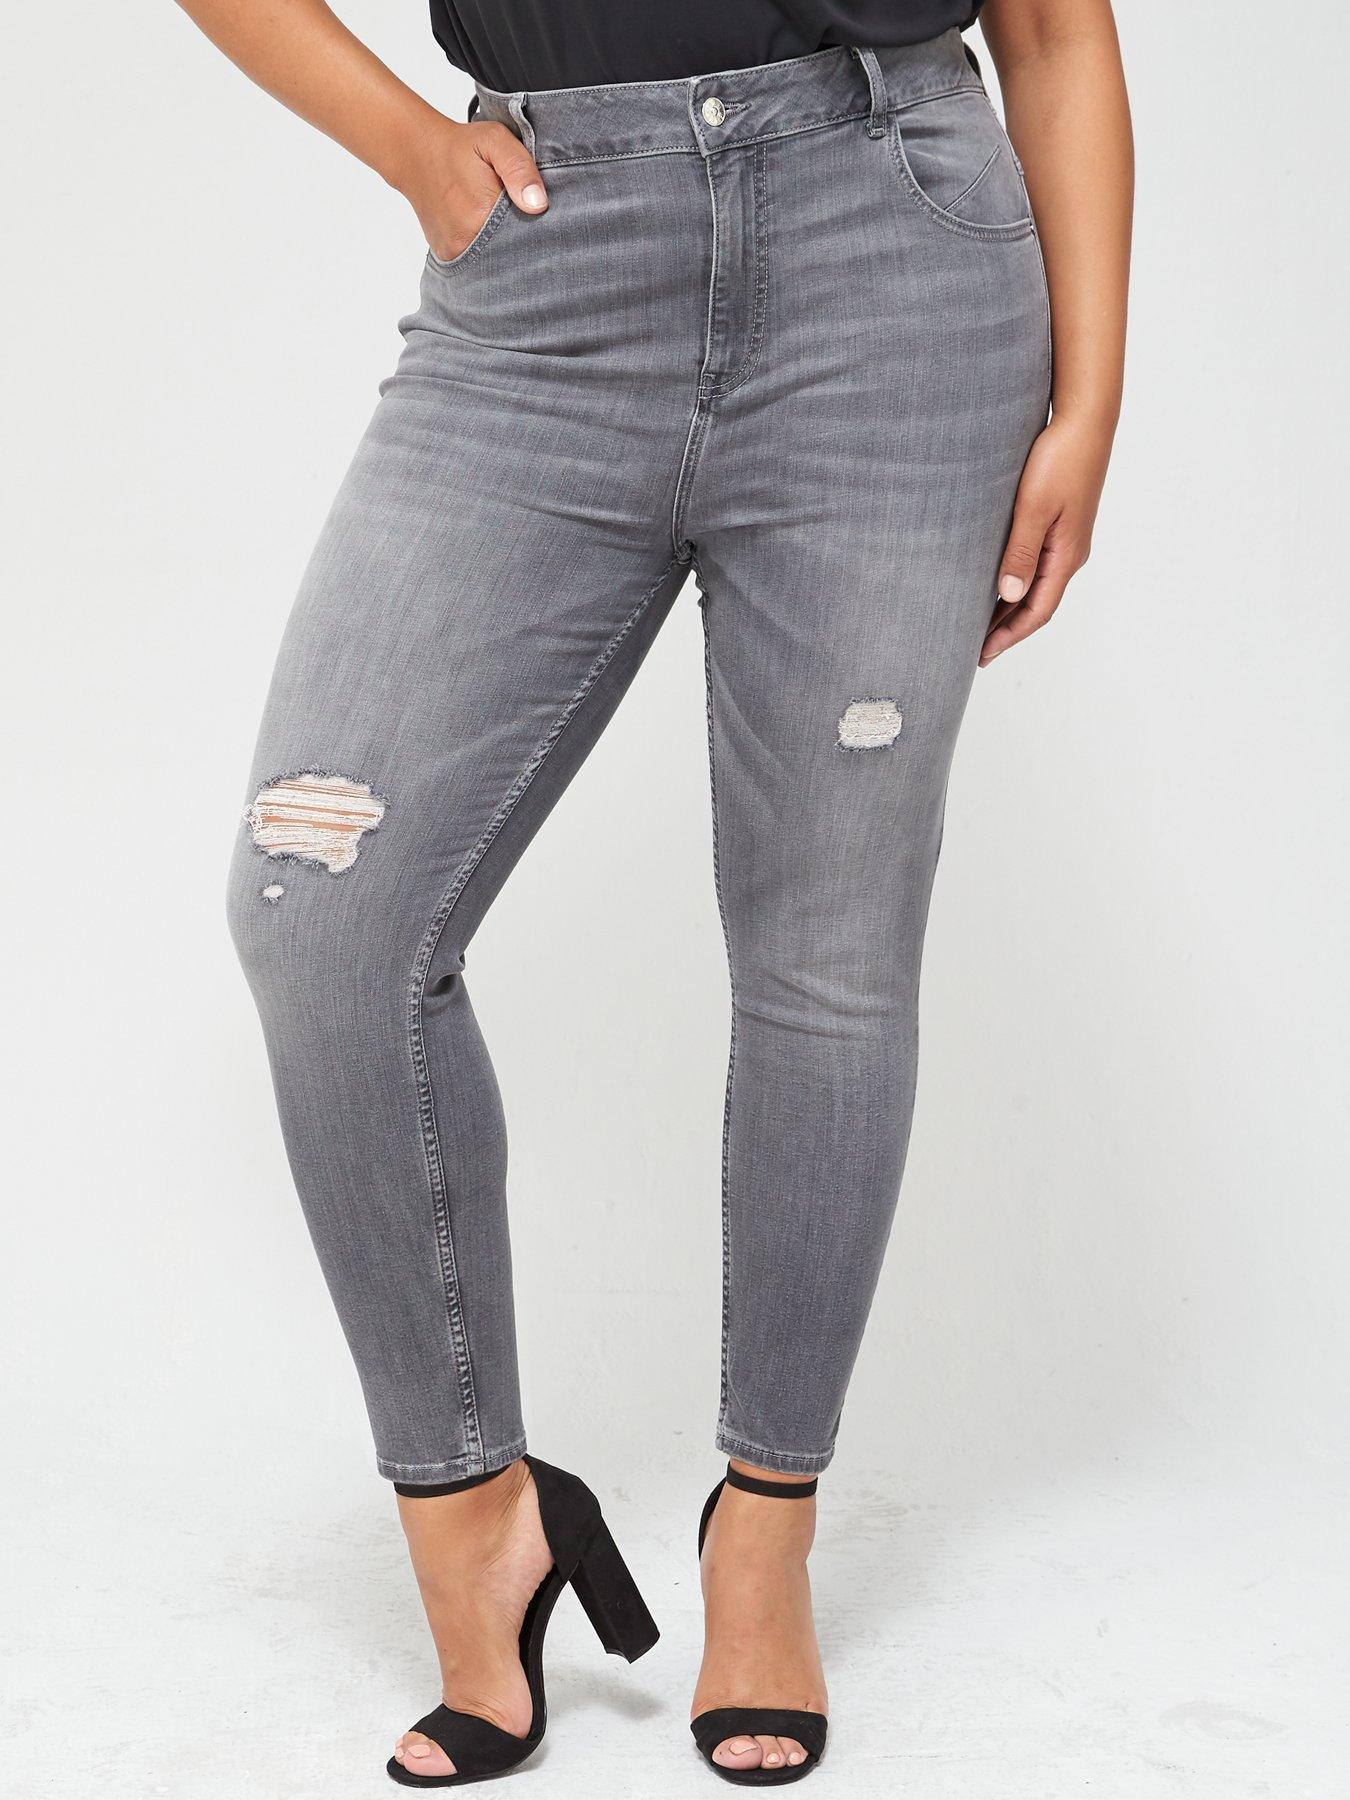 ripped skinny jeans womens plus size